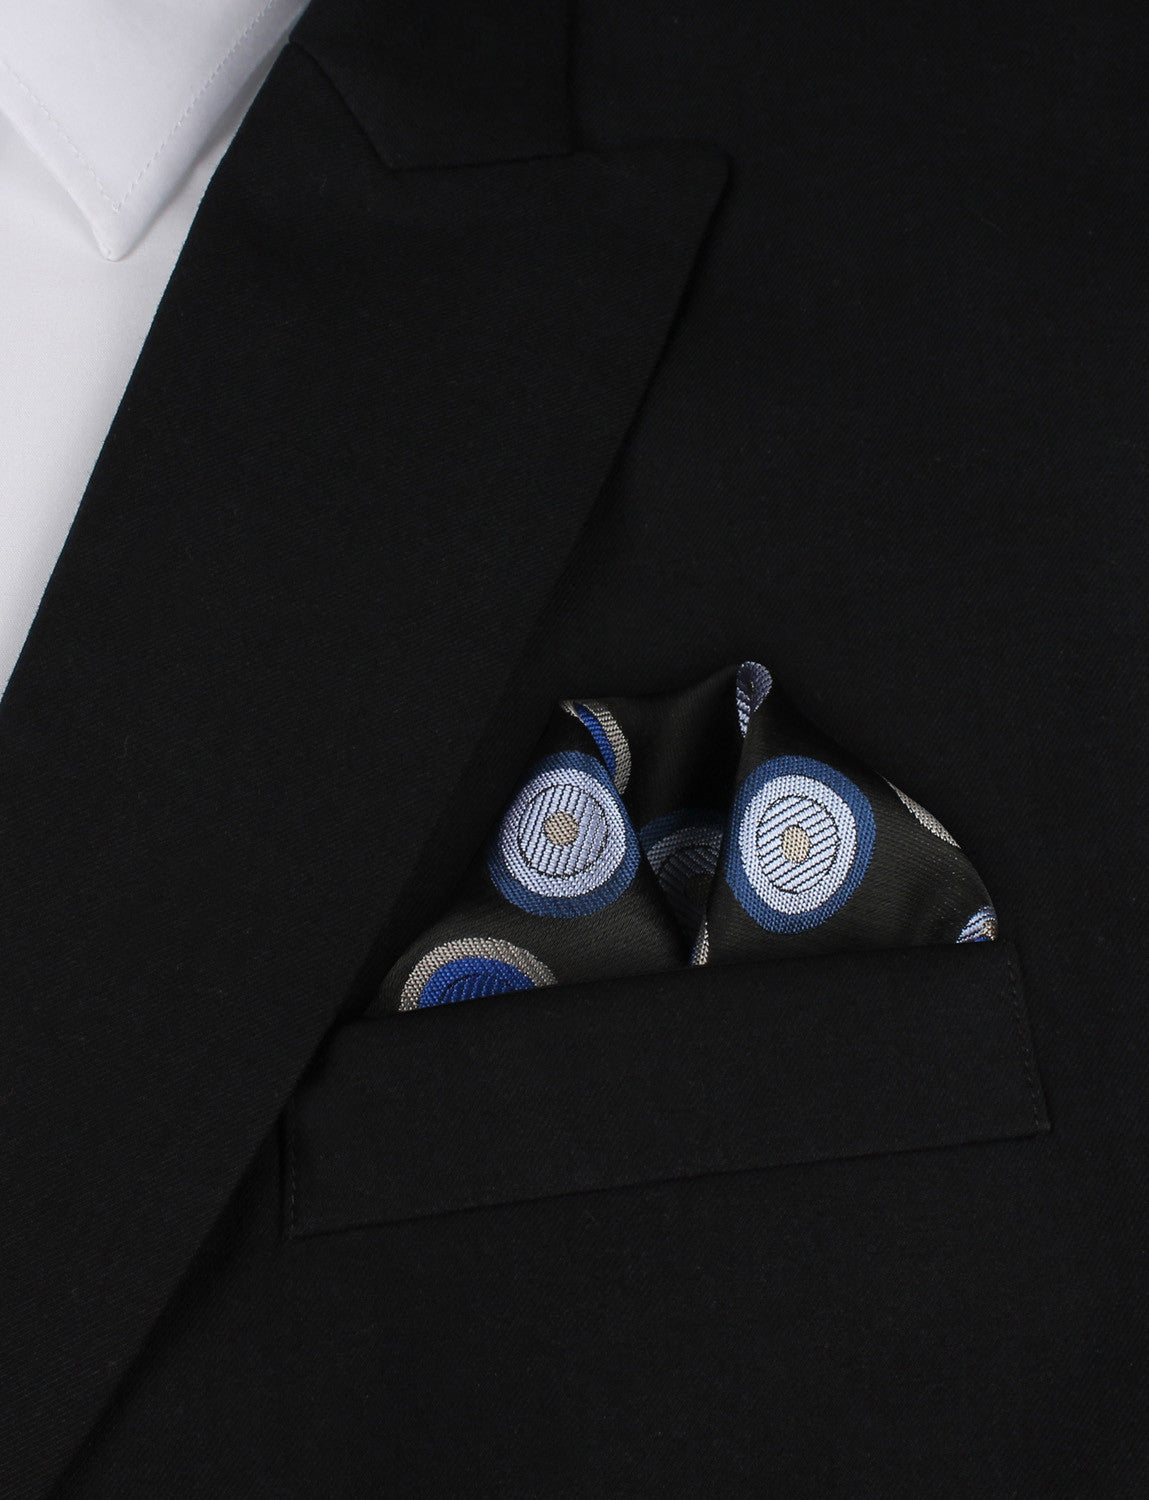 Black with Blue Circle - Winged Puff Pocket Square Fold